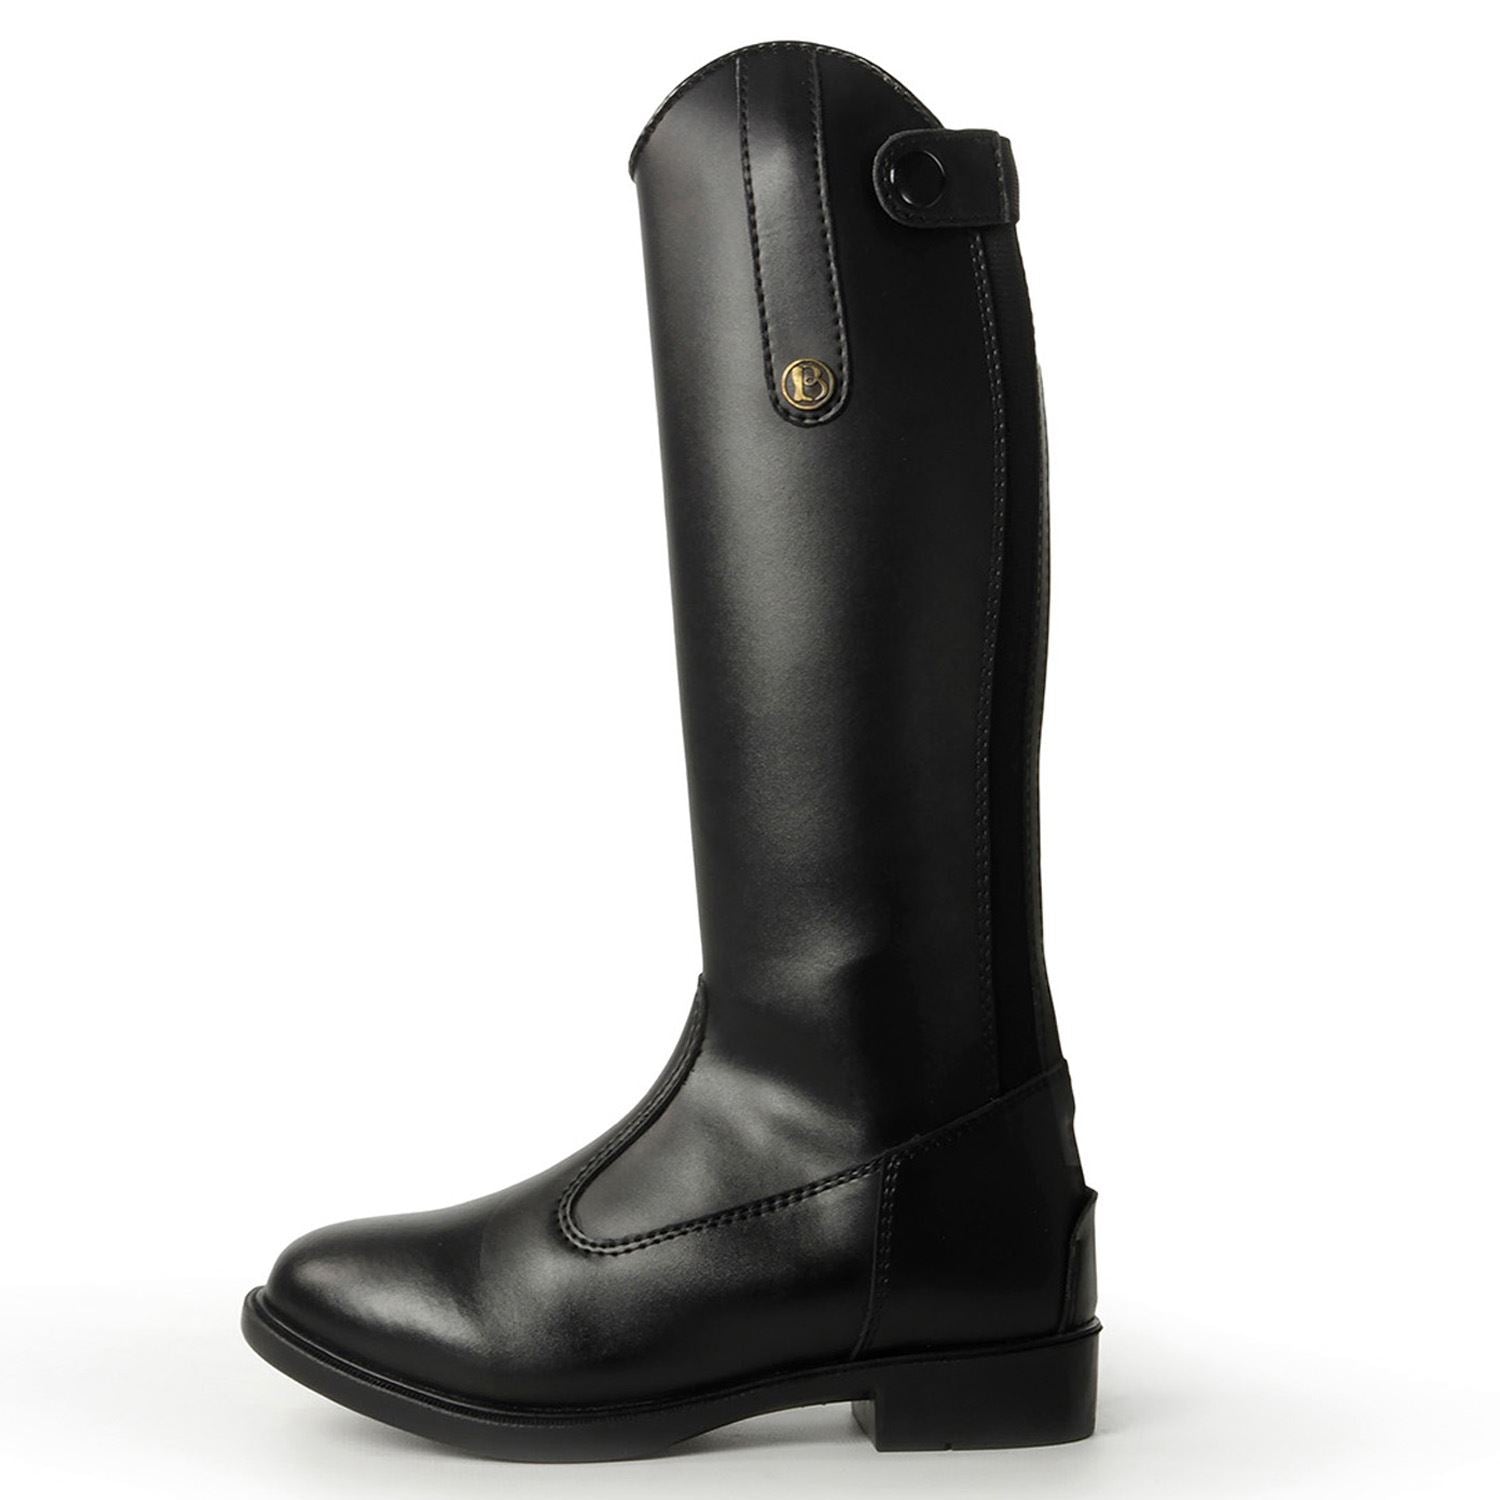 Brogini Modena Piccino Synthetic Long Horse Riding Boot Childs - Vegan-Friendly, FL3 Technology, Elasticated Fit, Designed for Comfort & Flexibility - Just Horse Riders